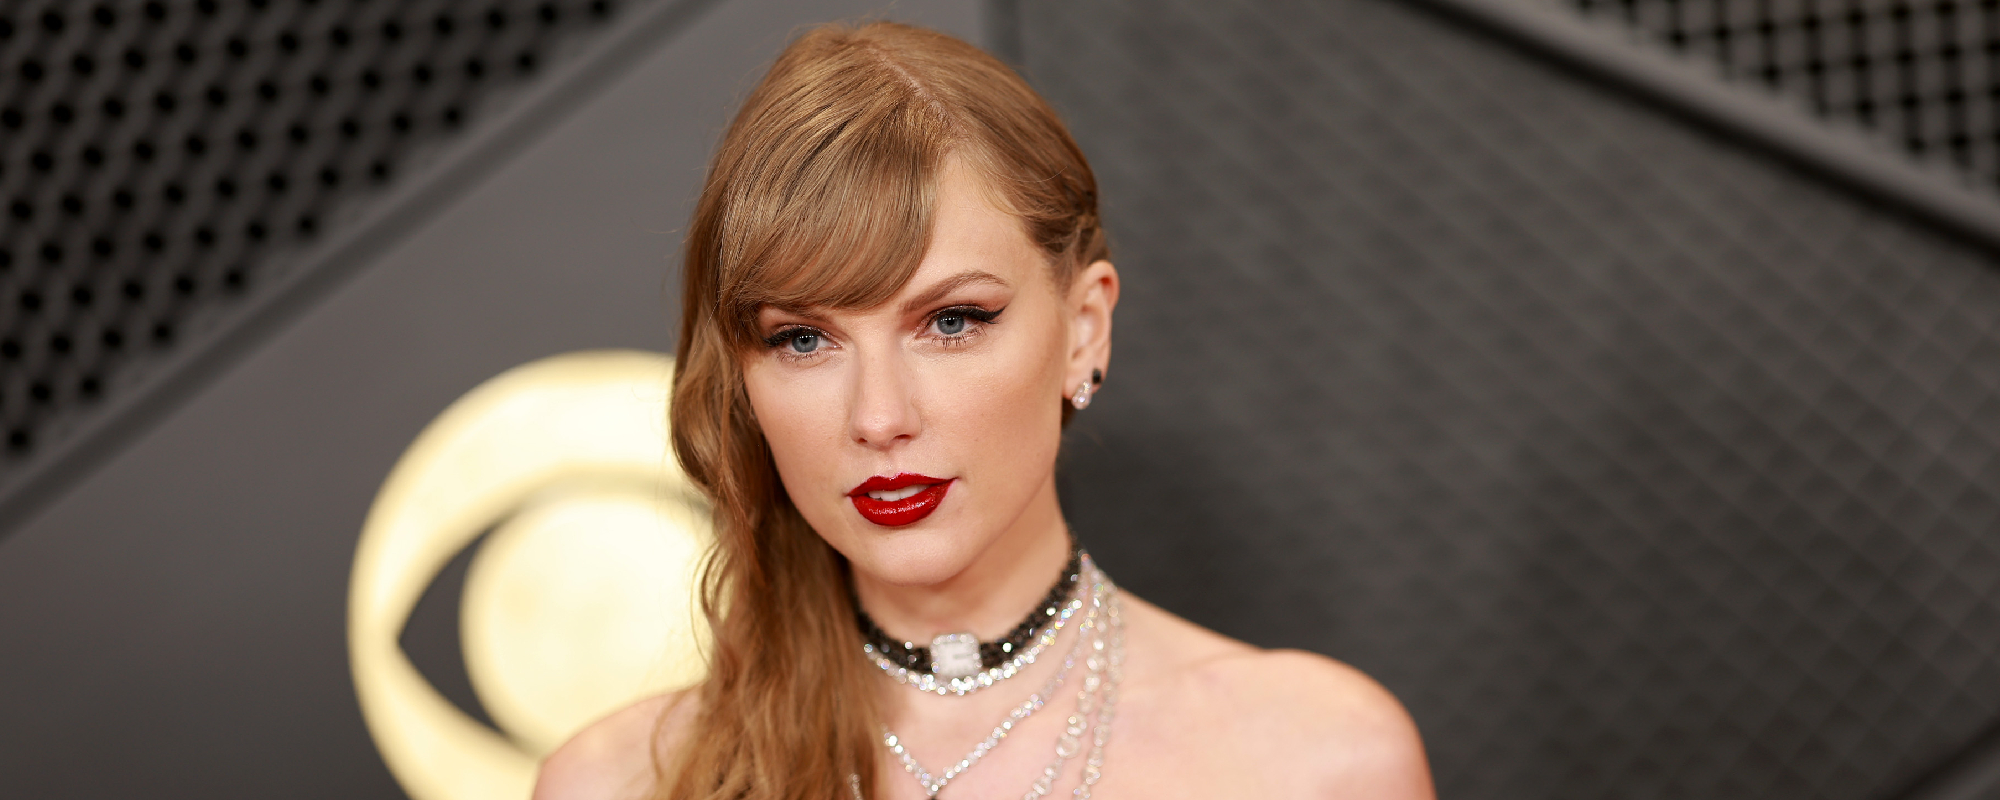 Taylor Swift’s Reaction to Miley Cyrus Beating Her for GRAMMY Award Sets Internet Ablaze